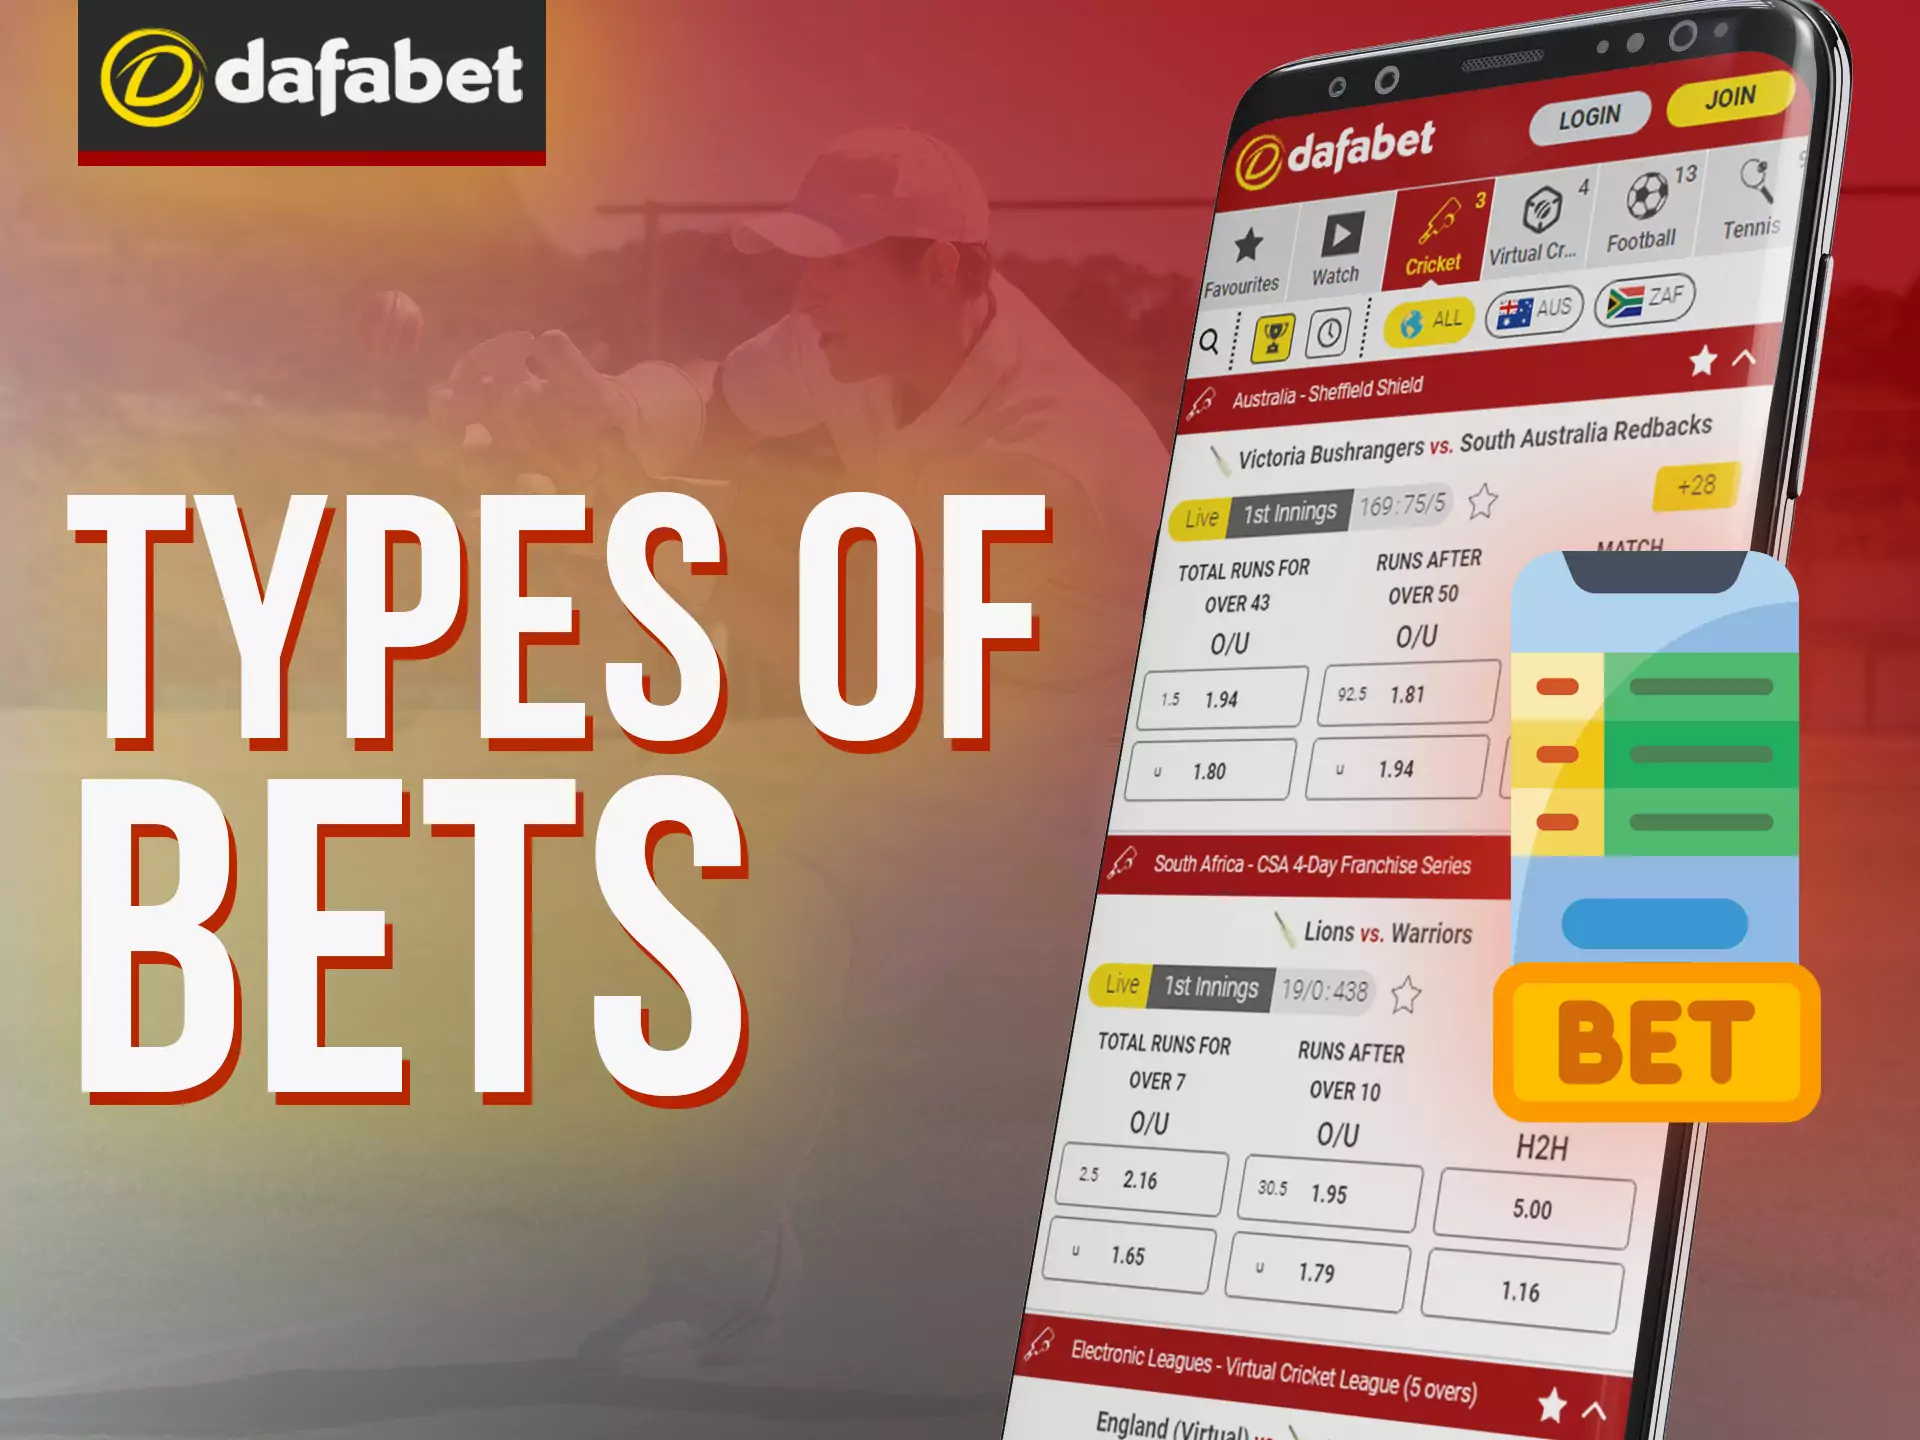 Select your type of bet and bet in Dafabet app.